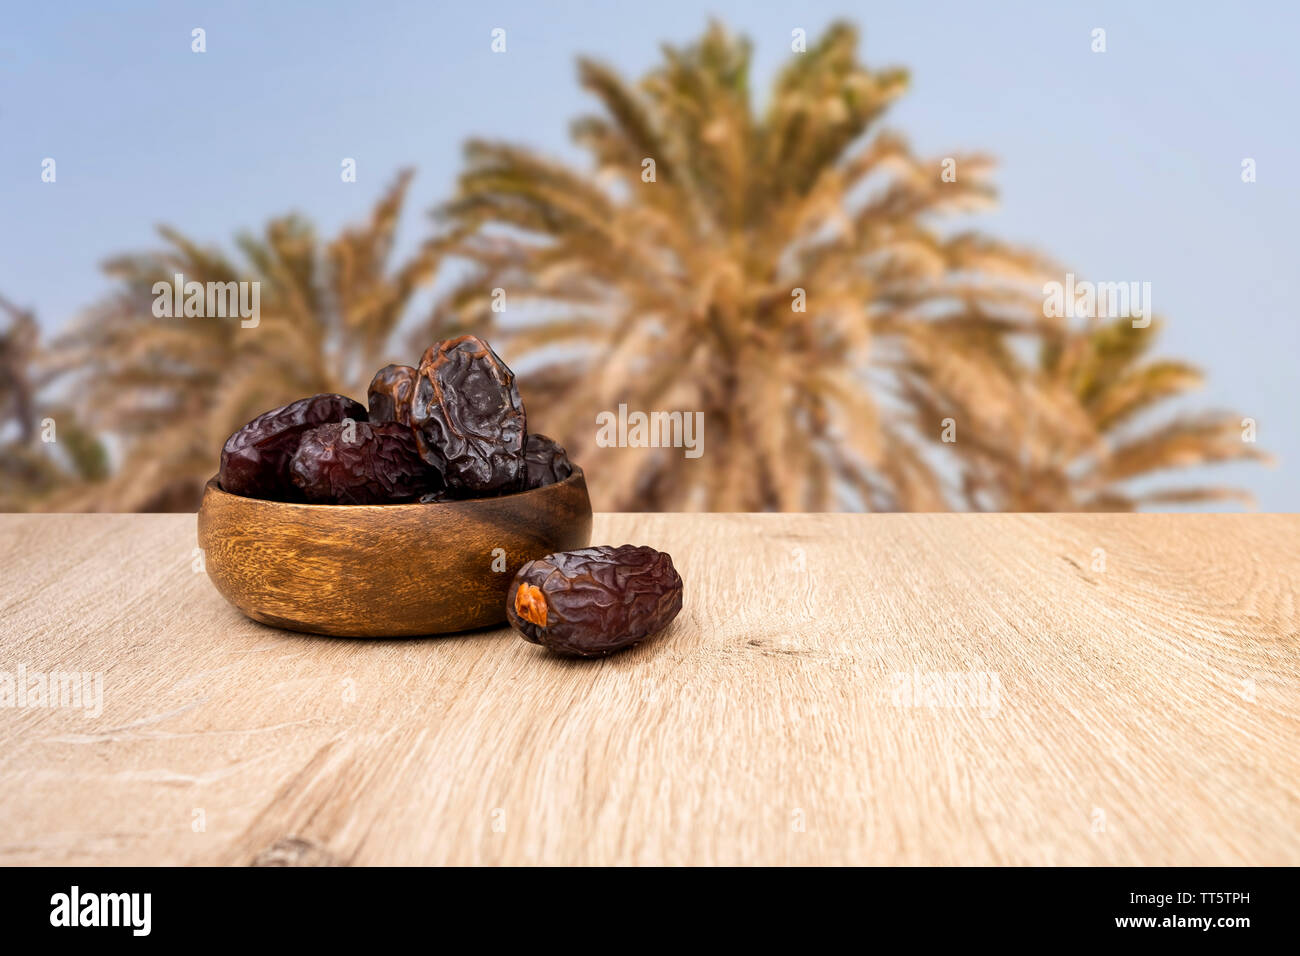 Dates fruit in bowl, background is date fruit tree Stock Photo